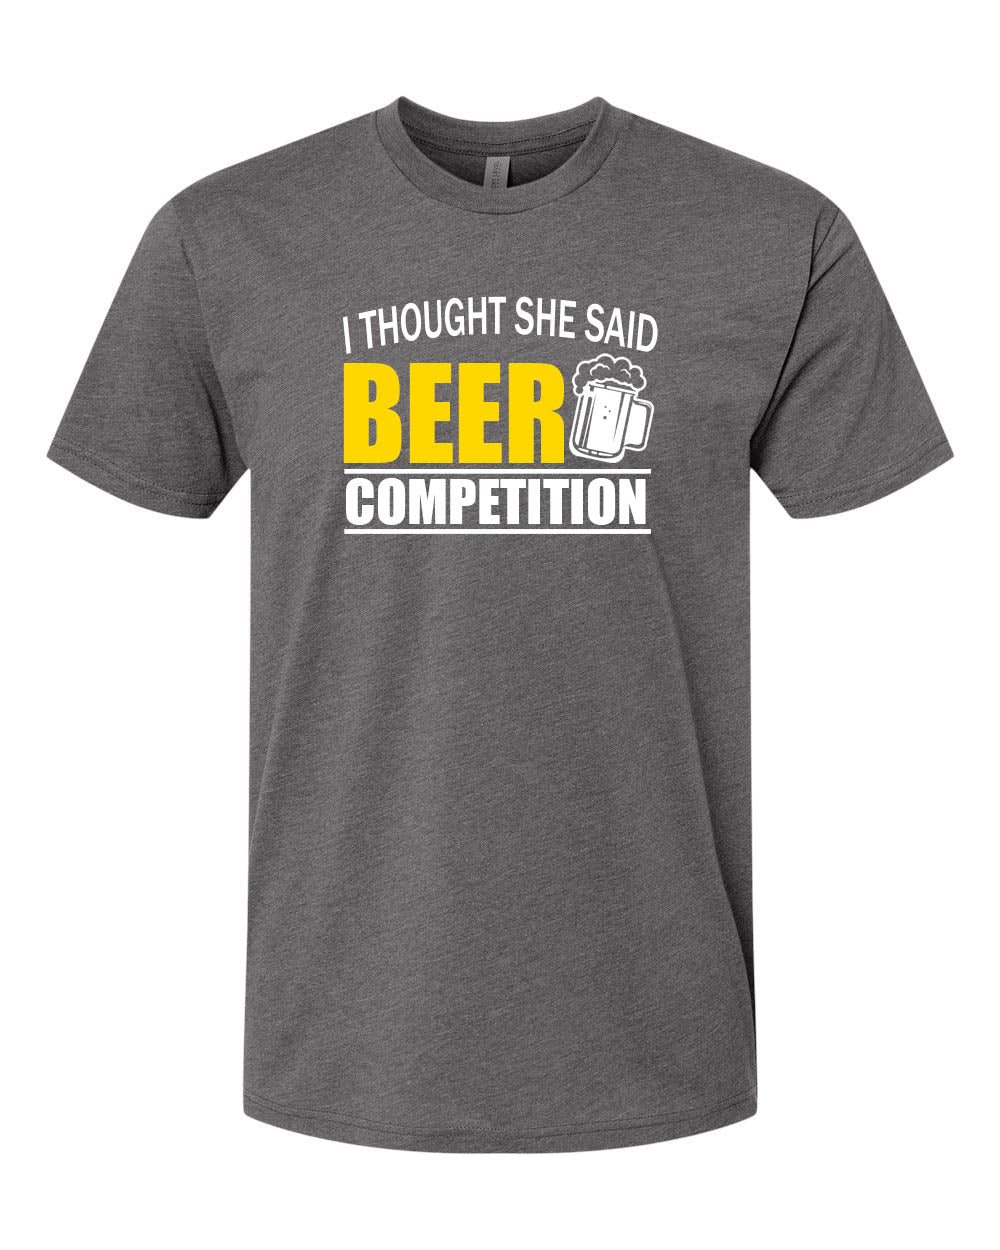 Cheer Competition T-Shirt